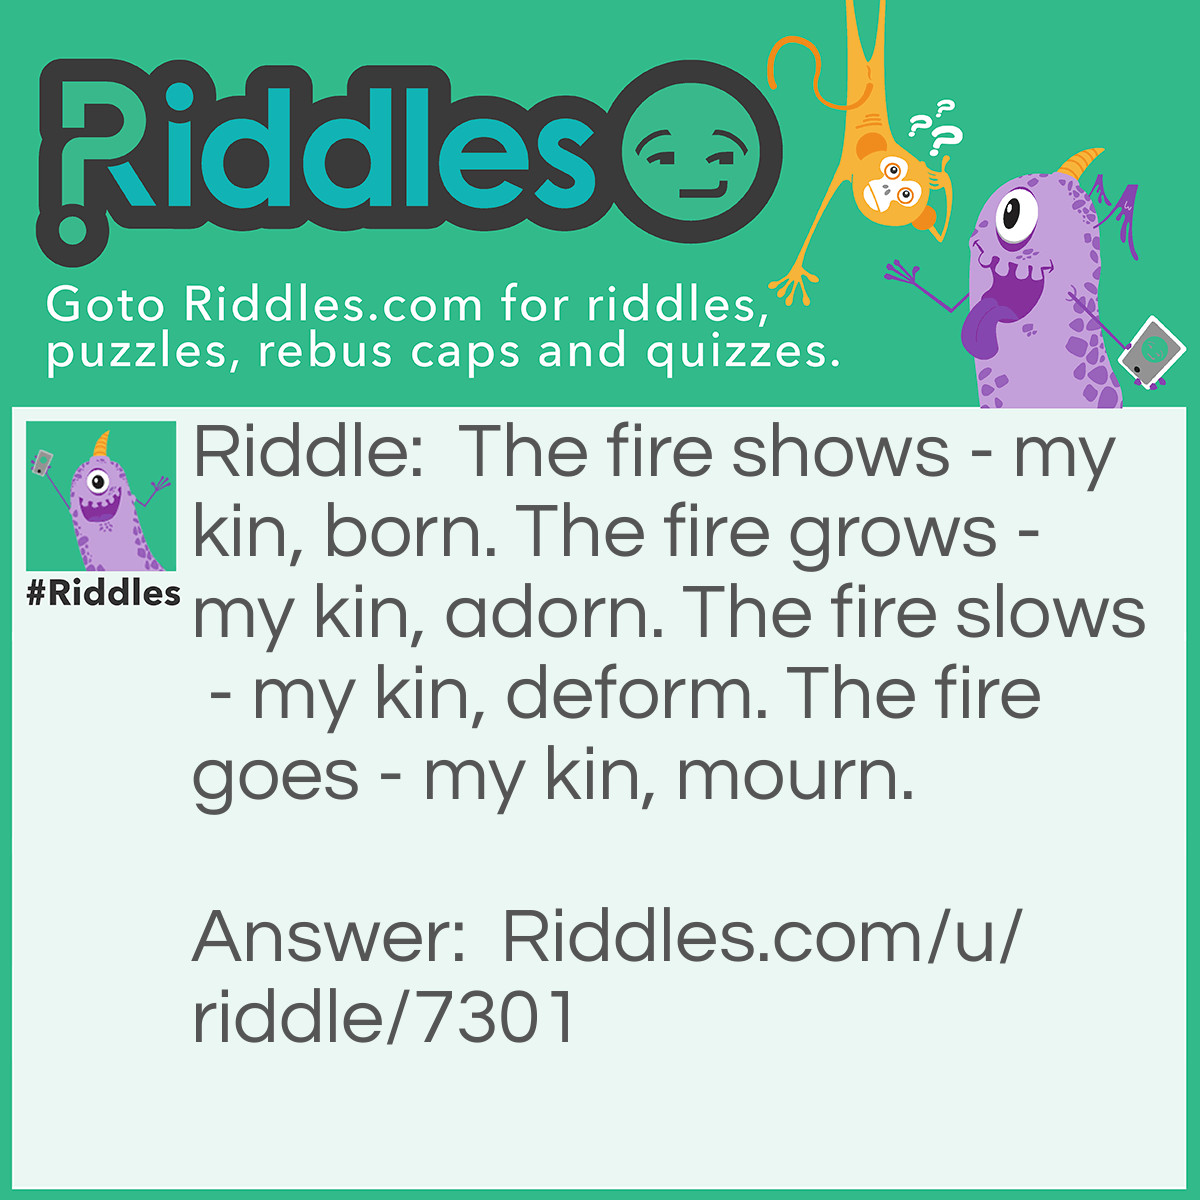 Riddle: The fire shows - my kin, born. The fire grows - my kin, adorn. The fire slows - my kin, deform. The fire goes - my kin, mourn. Answer: Fruit-bearing tree through the four seasons.